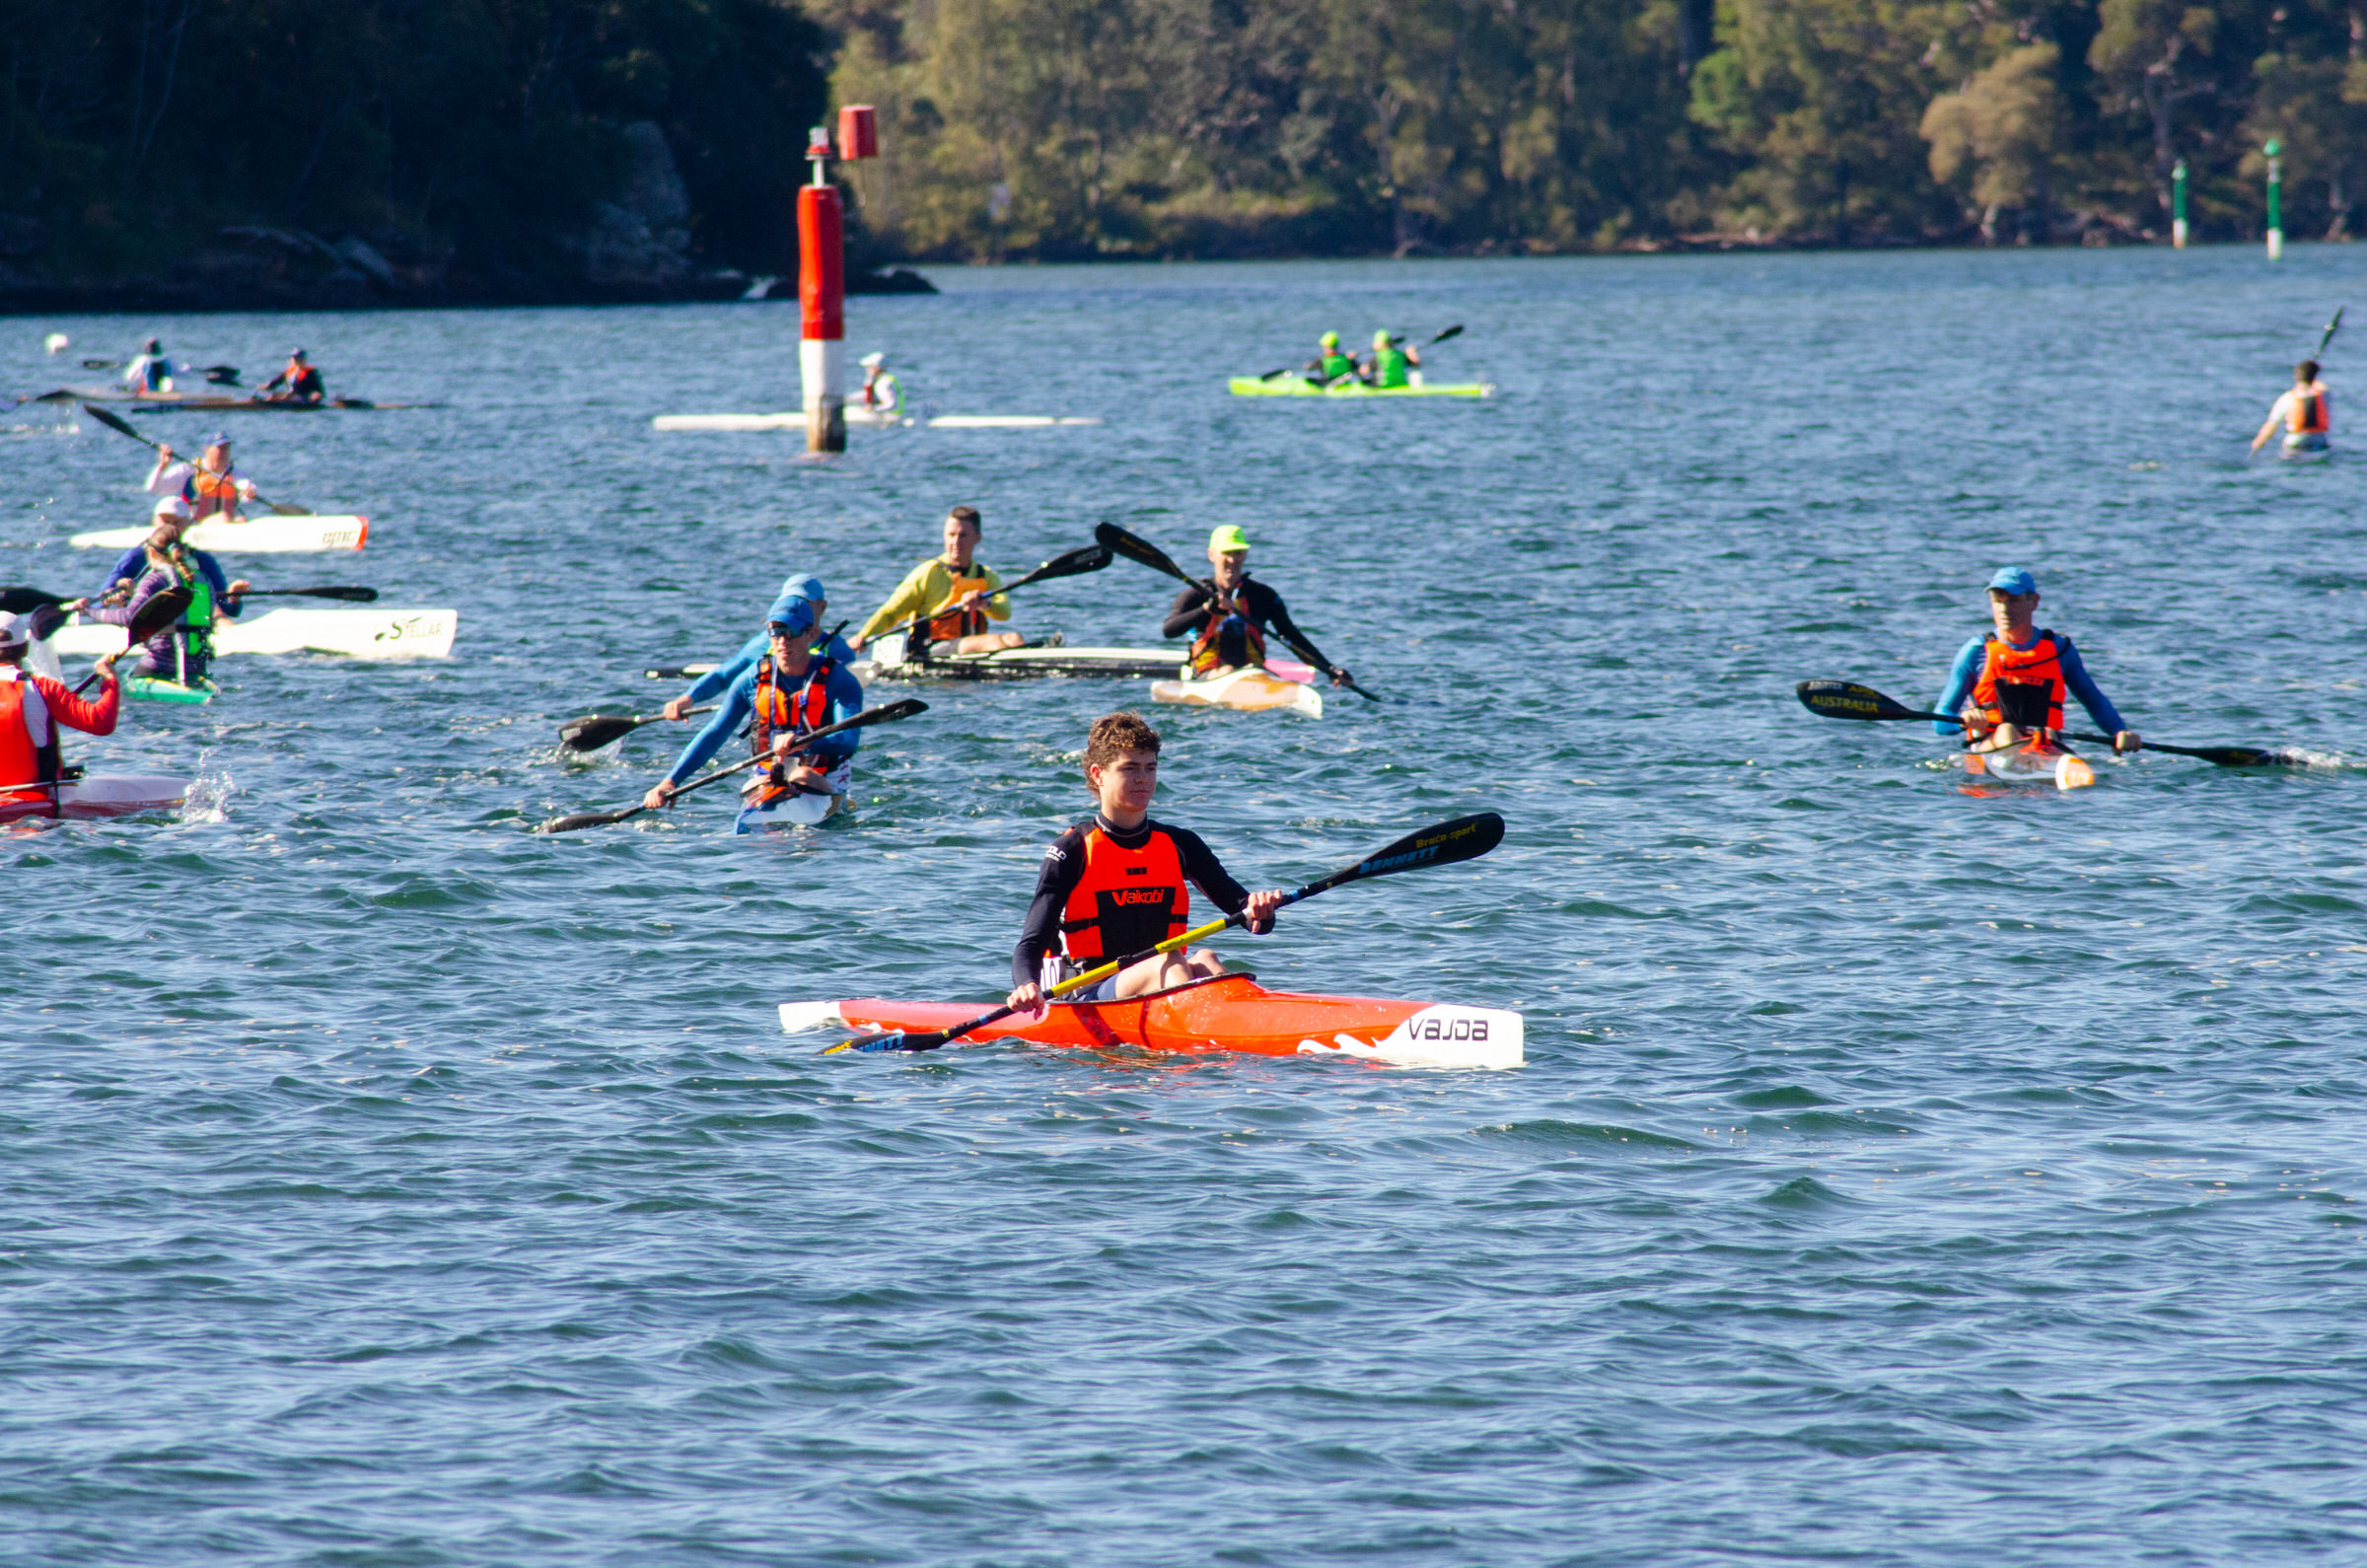 Kayakers warming up for race